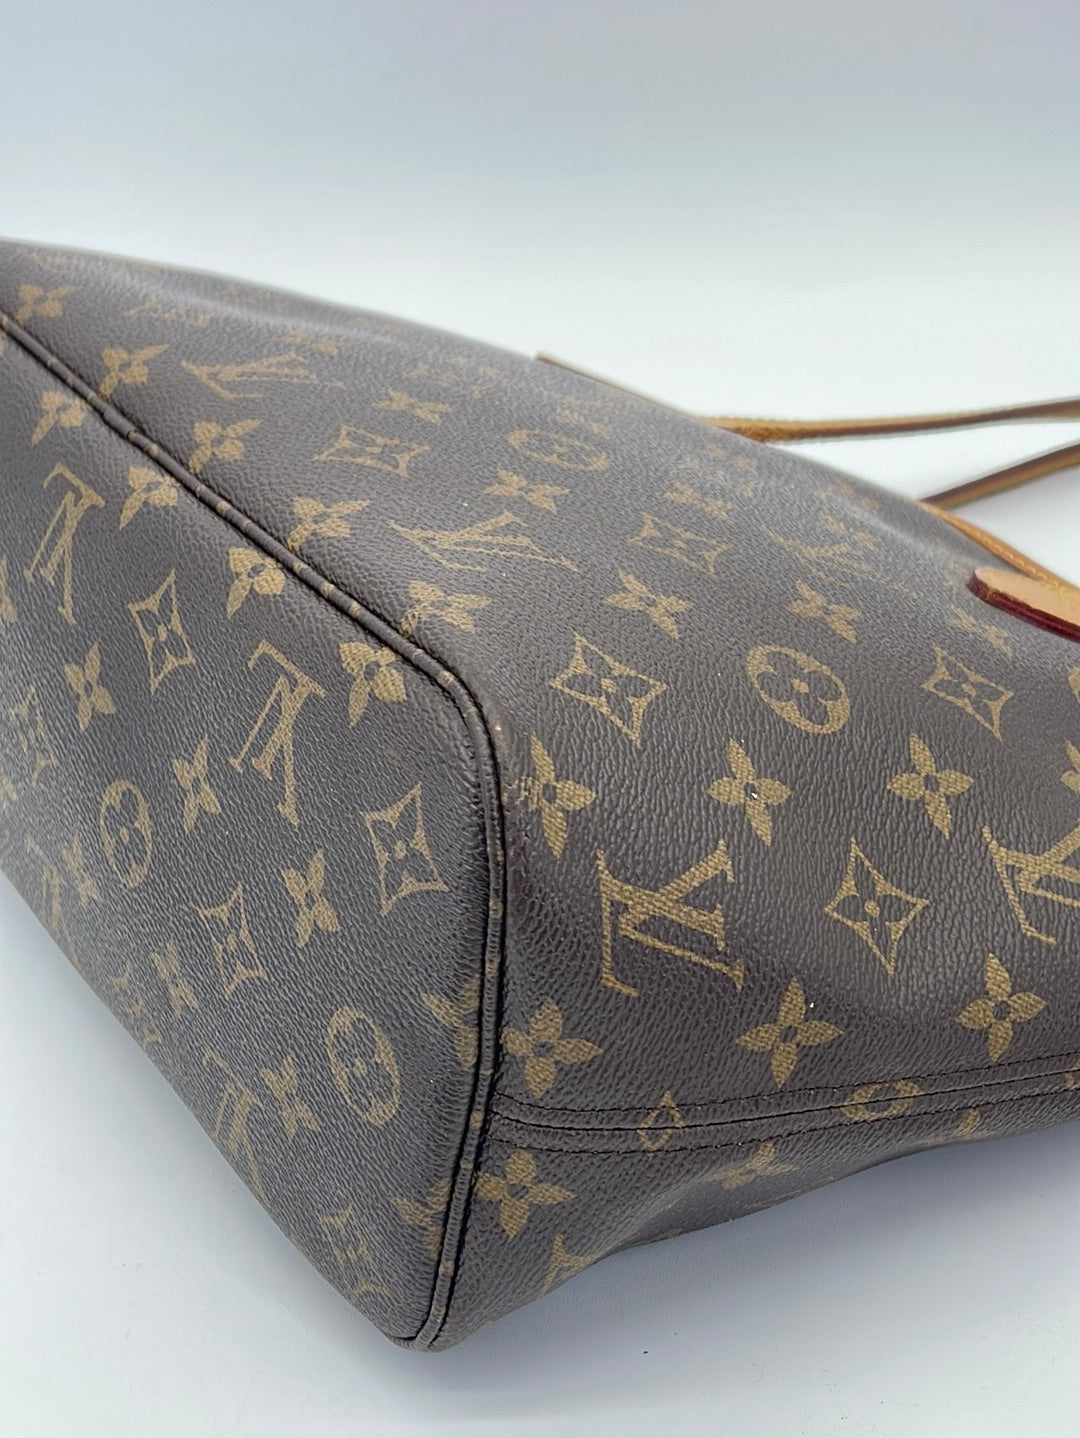 Louis Vuitton Small Monogram Neverfull PM Tote bag 11lk323s For